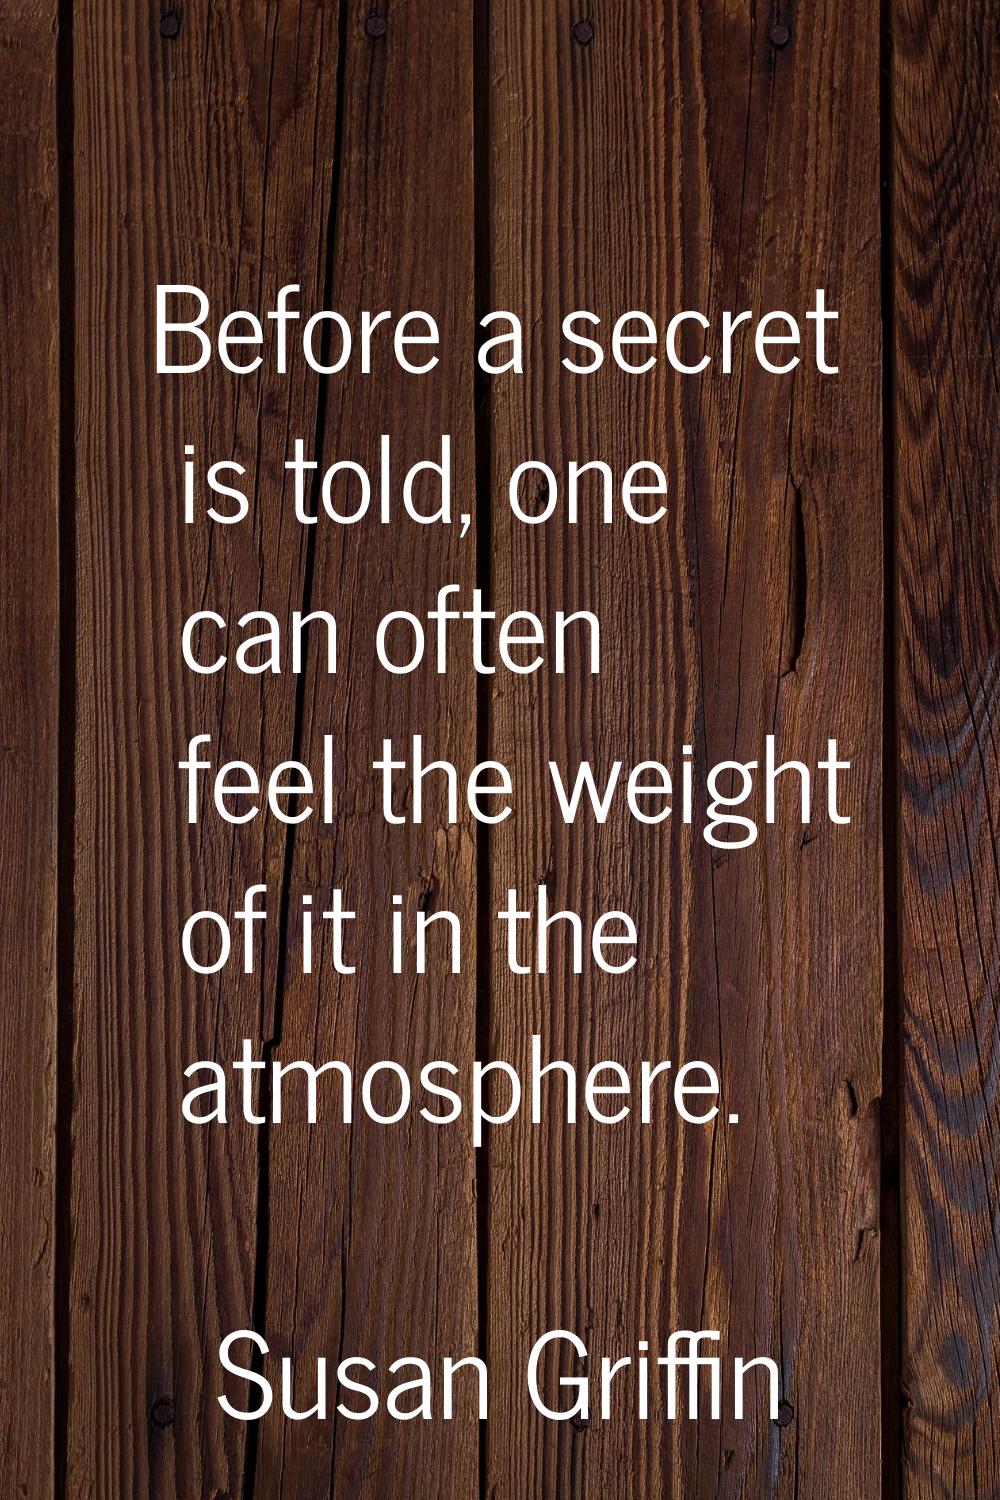 Before a secret is told, one can often feel the weight of it in the atmosphere.